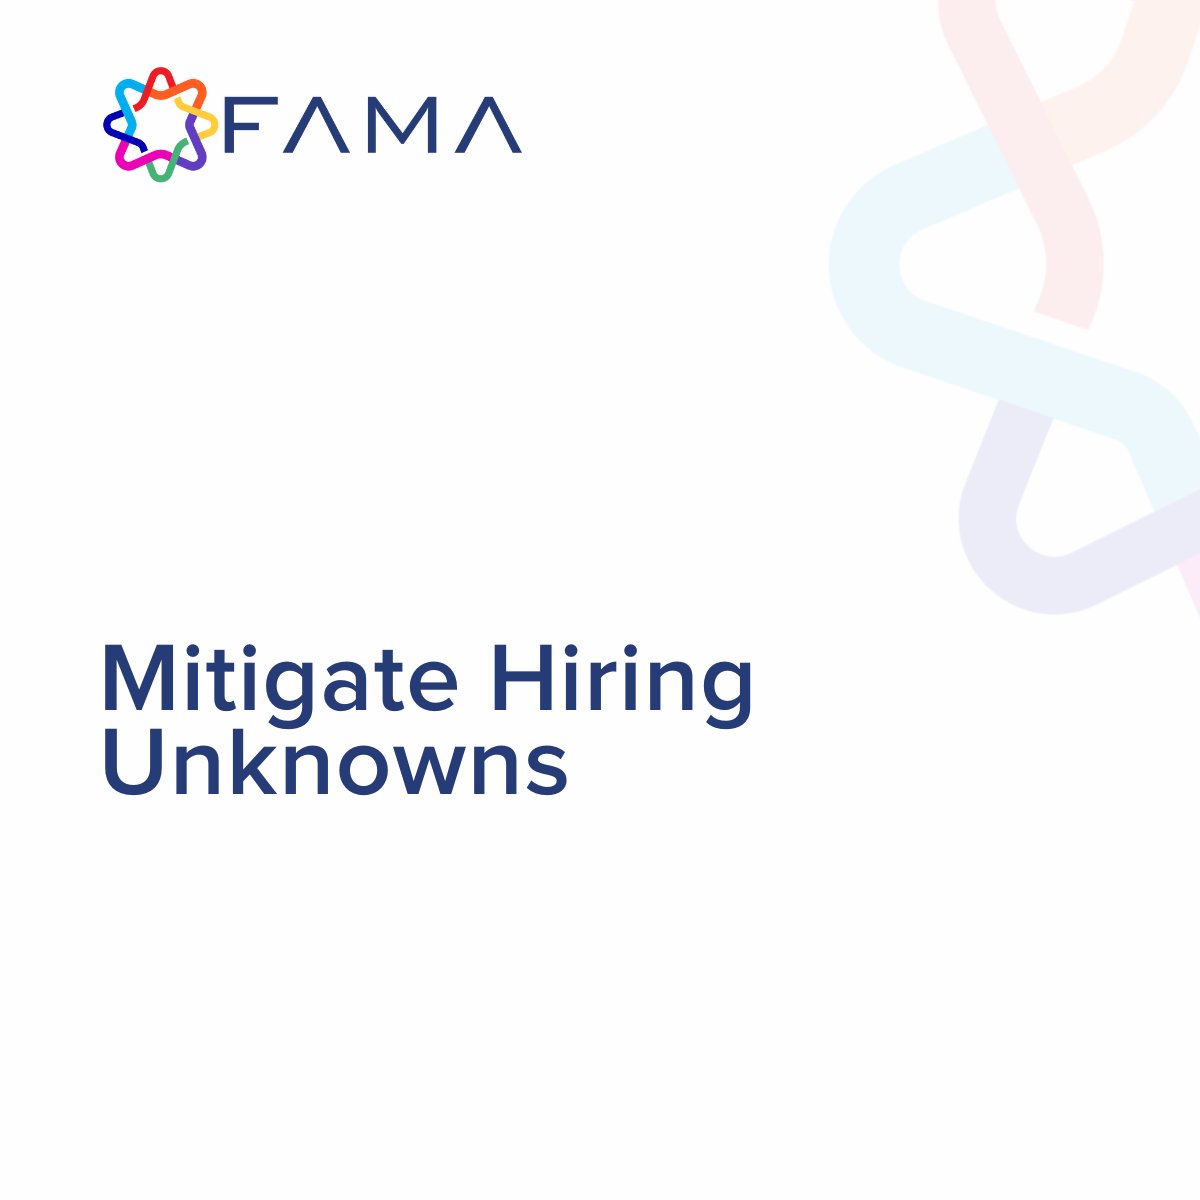 Discover and prevent possible workplace misconduct issues like fraud, threats, and harassment with Fama. 

#OnlineScreening #TalentAcquisition #BrandReputation #WorkplaceMisconduct #EmployeExperience #HRTech #Legal #Risk #Compliance #HR #Recruitment